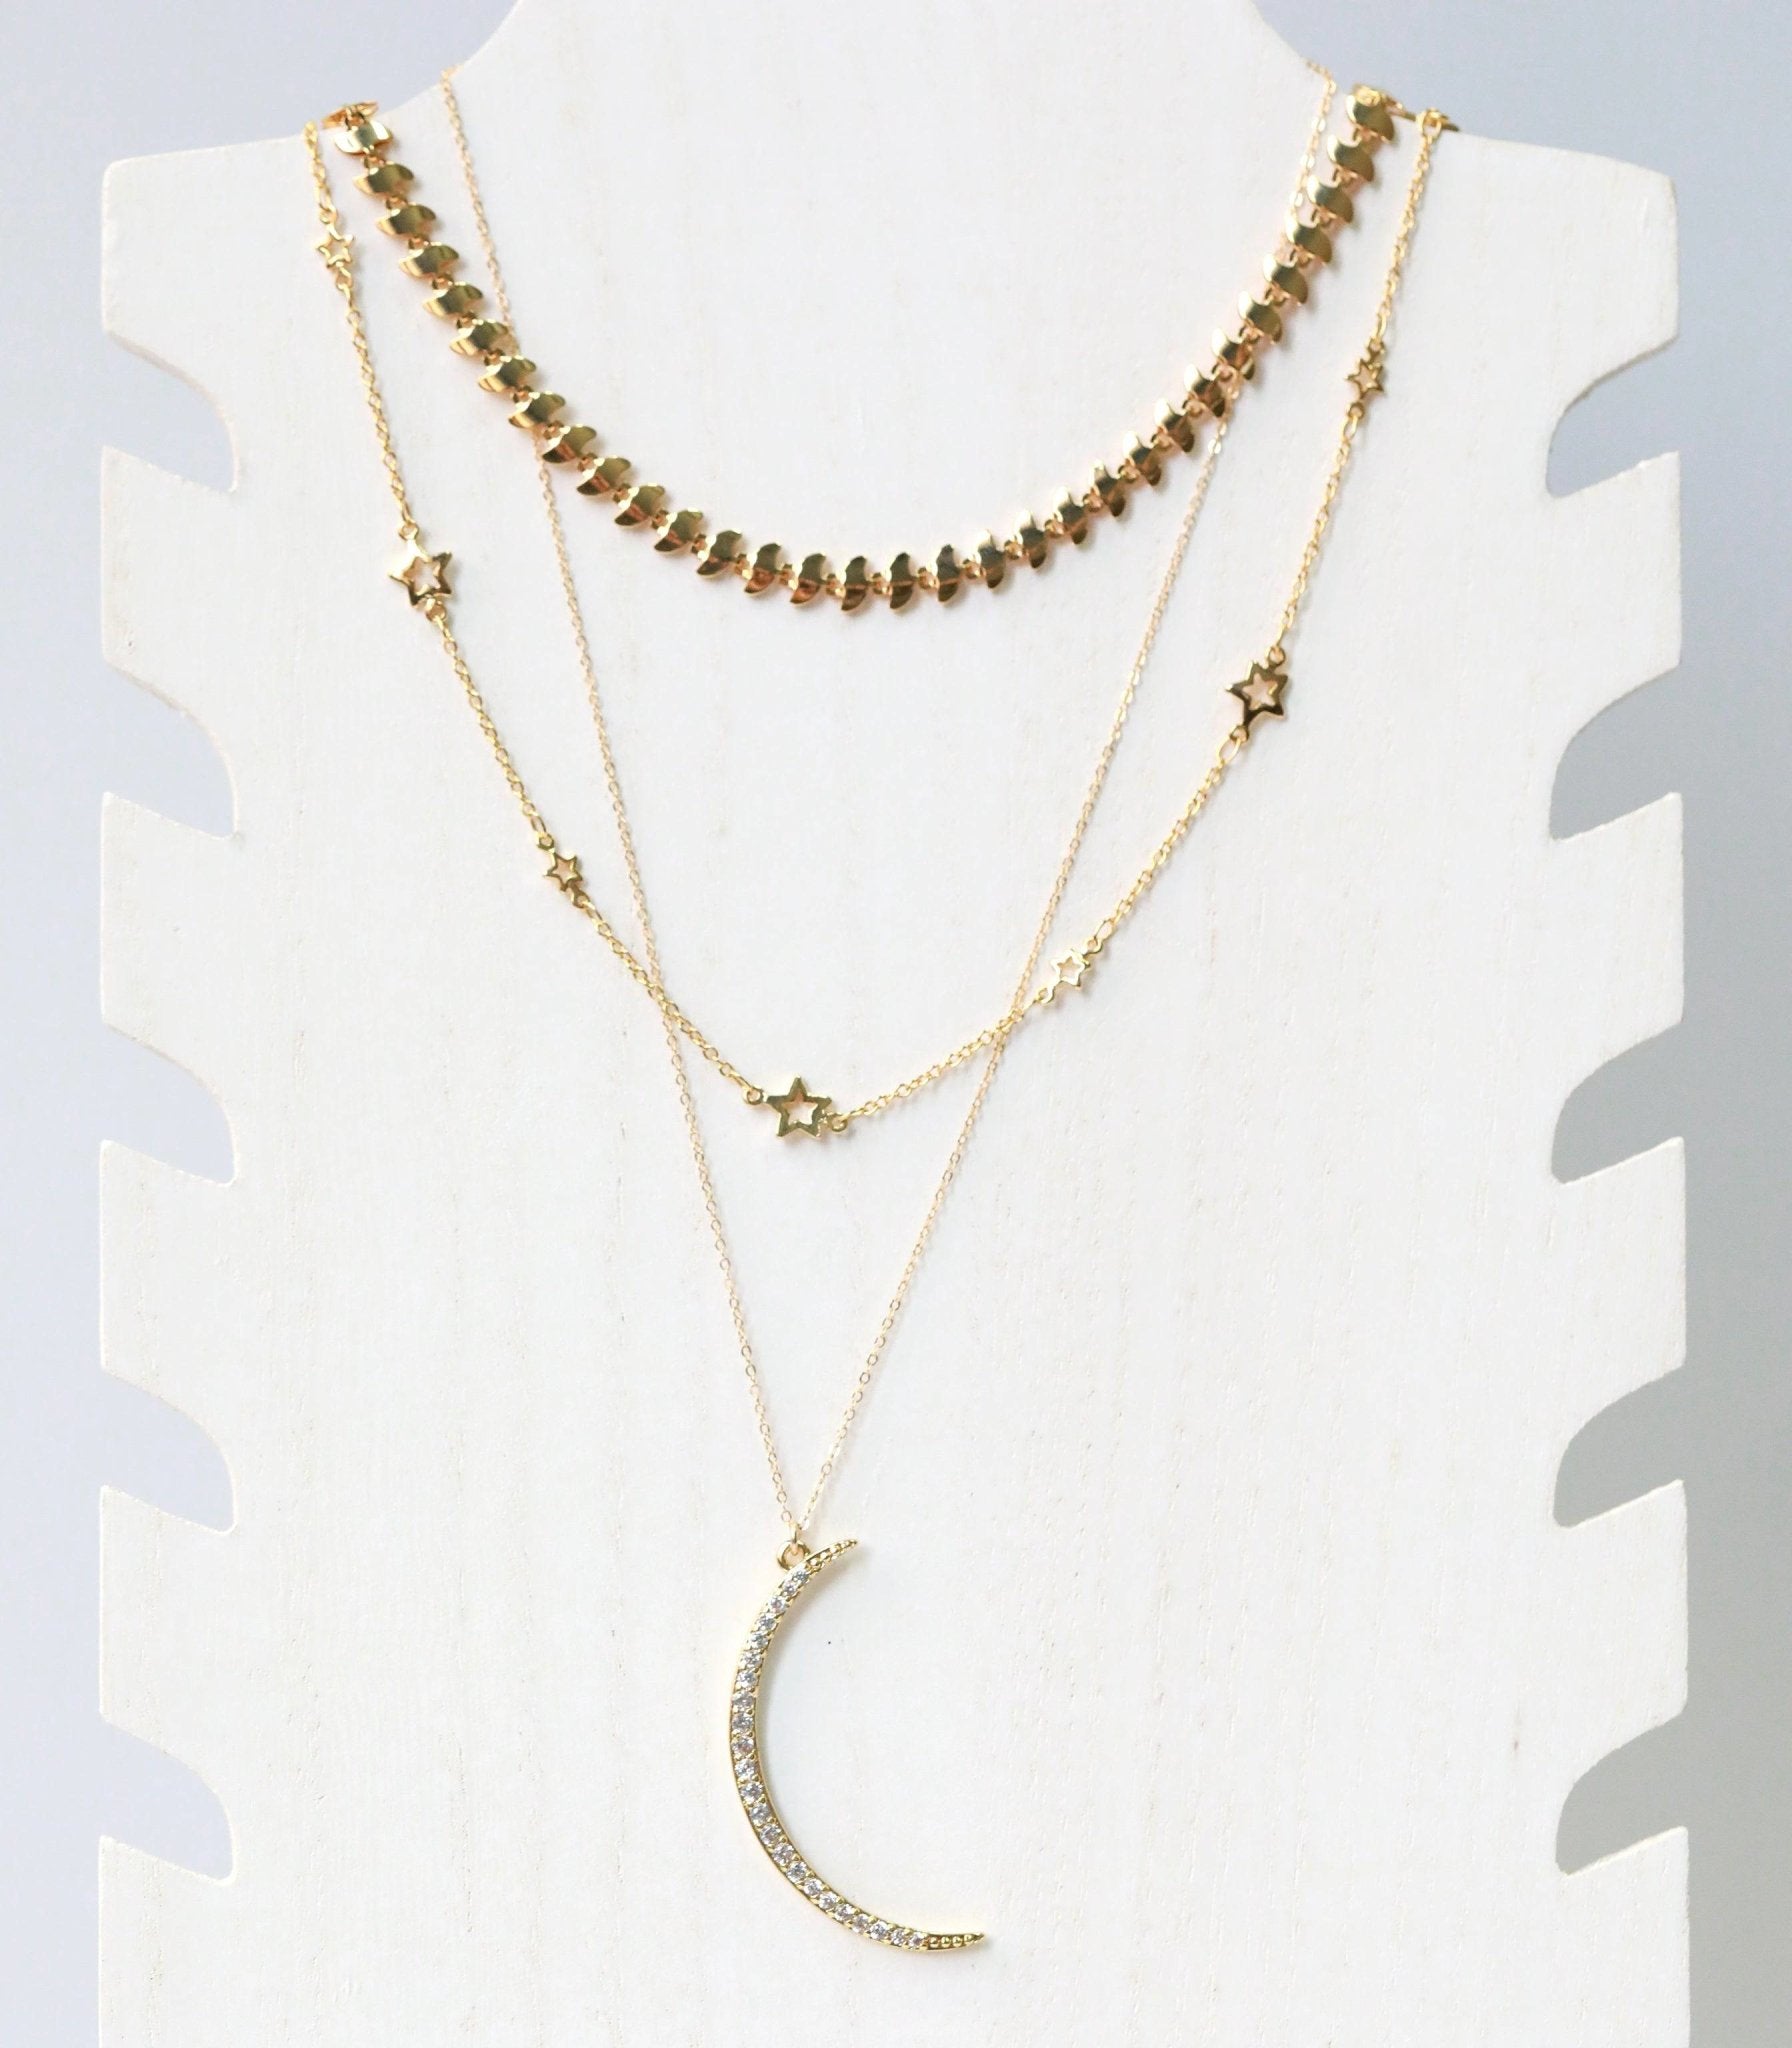 Salem Chain Necklace - The Gilded Witch